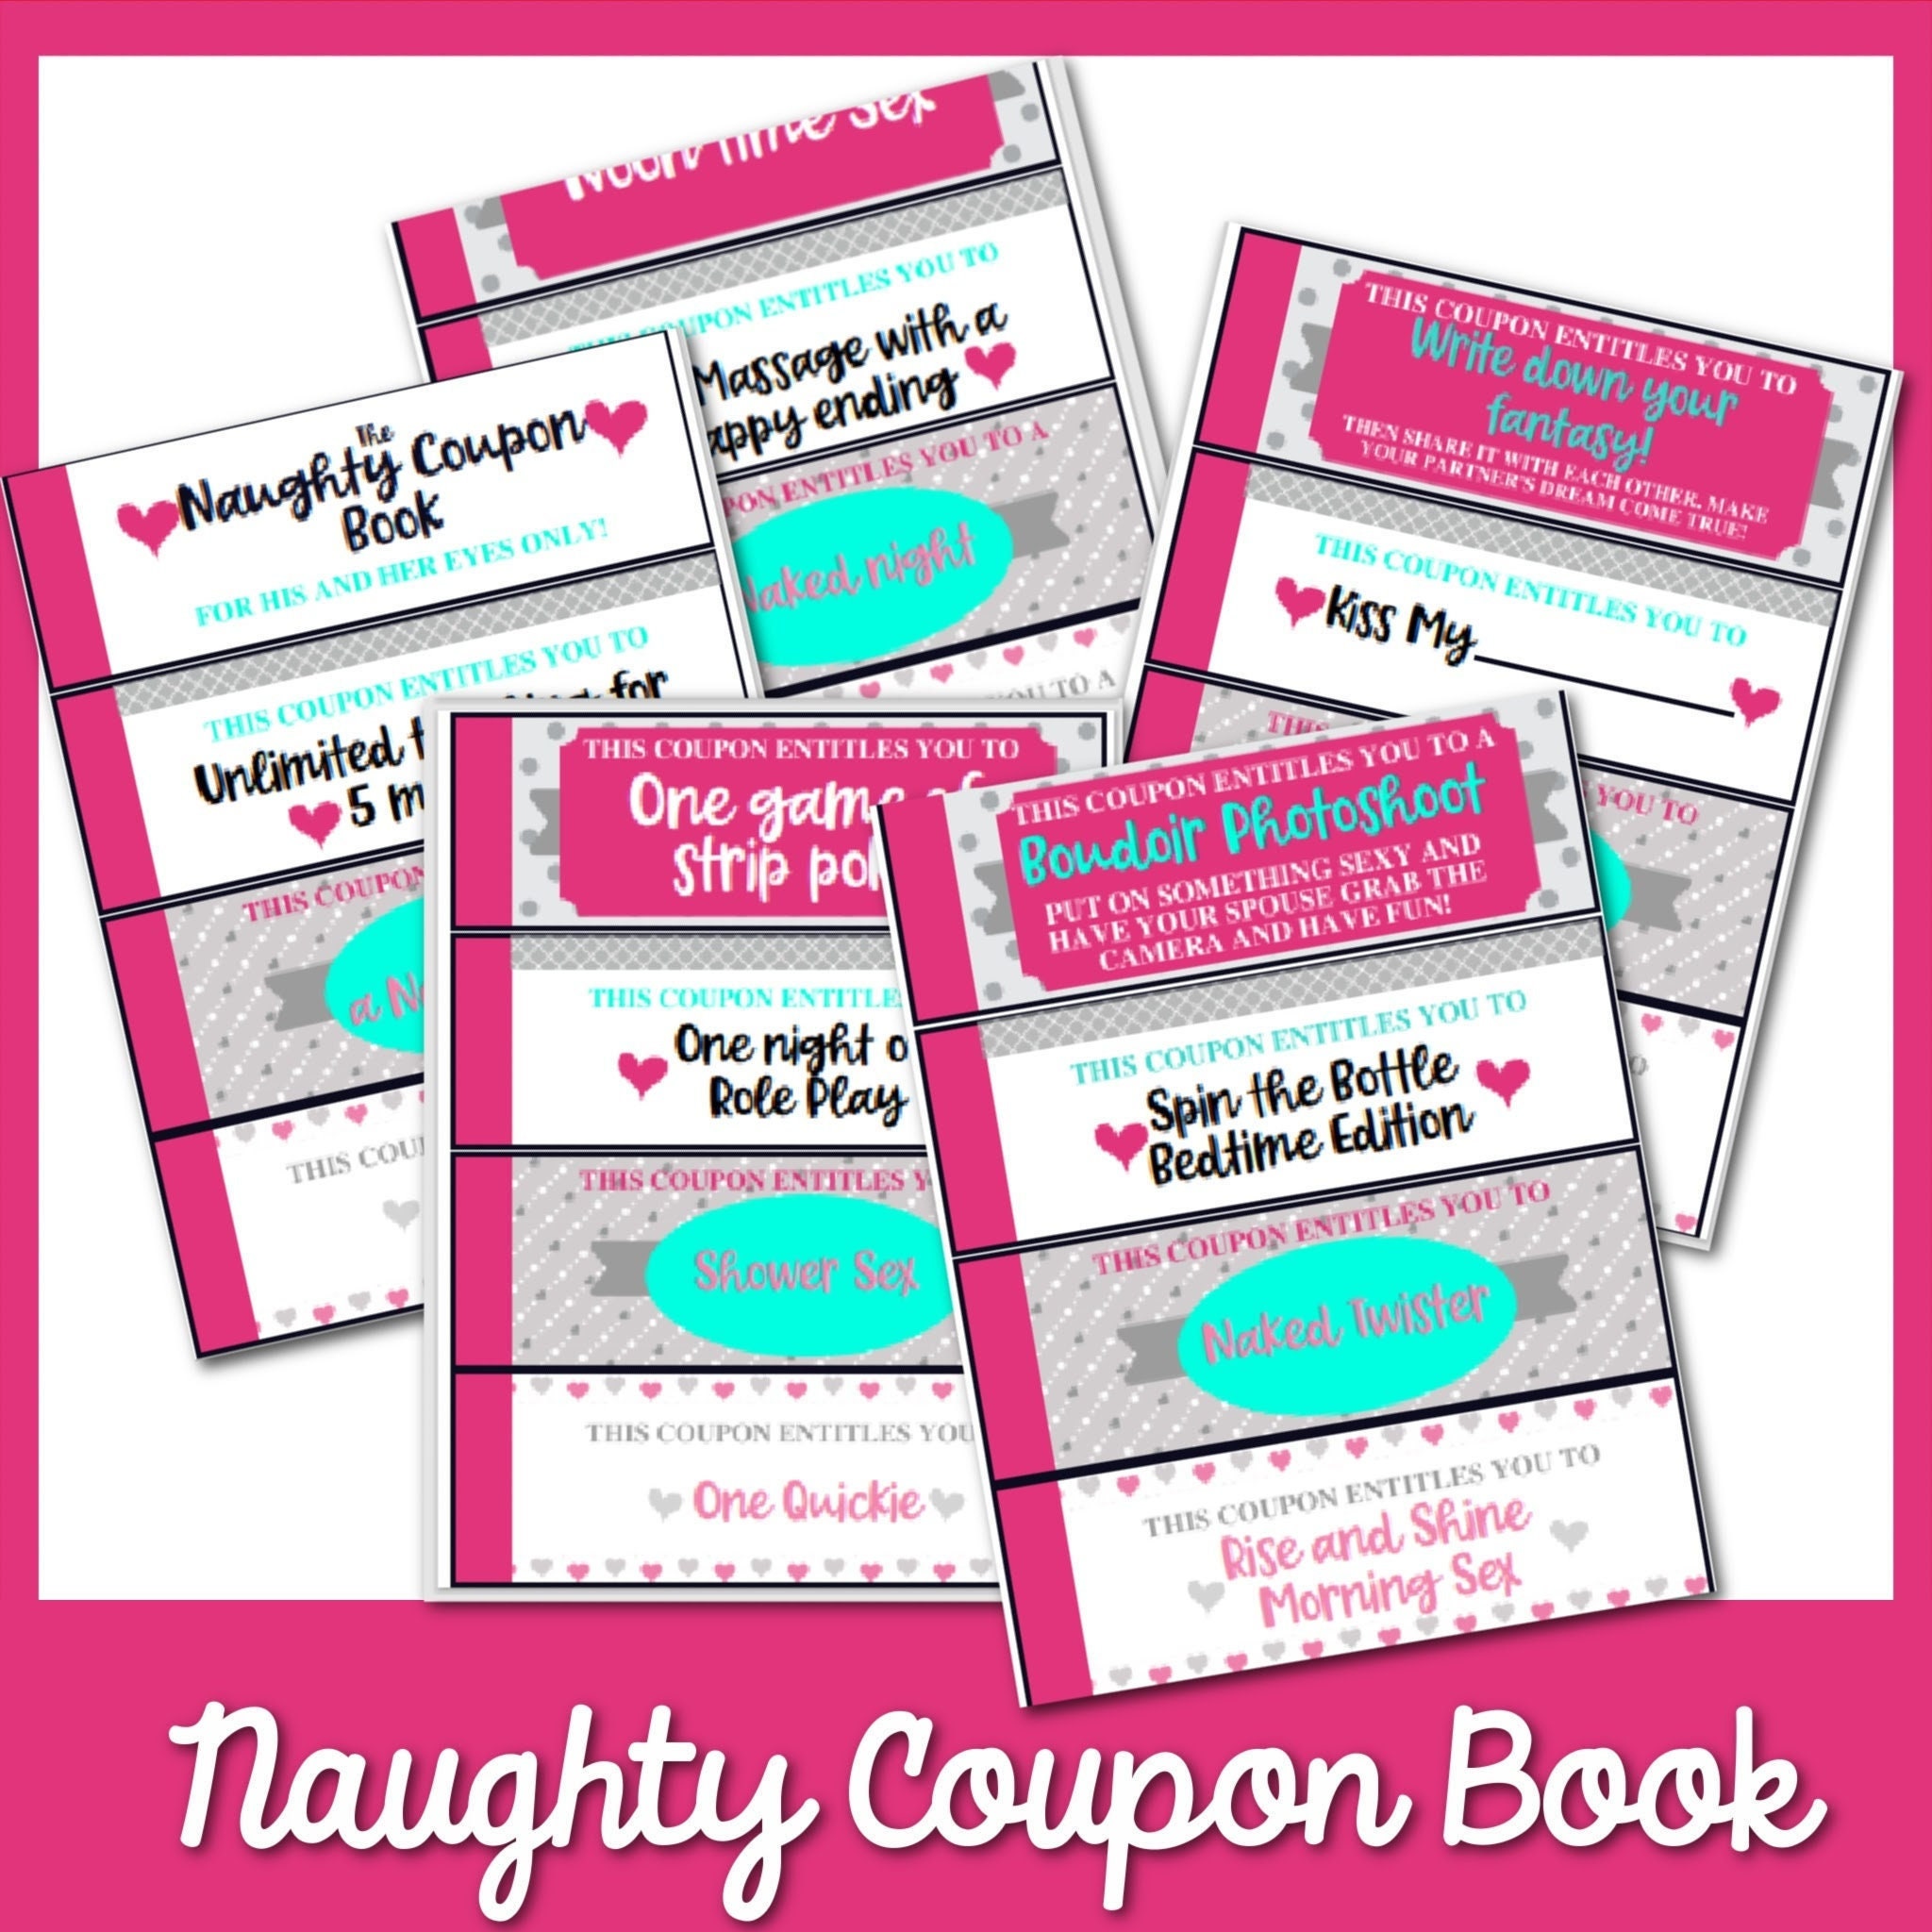 You're my valentine: 52 Hot and Naughty Sex Coupons Book/sex coupons valentines  day for him/funny valentines day gift for husband,him,men/sexy coupon   Sex Vouchers For Him valentine: coupons, hot sex: 9798608309694: 